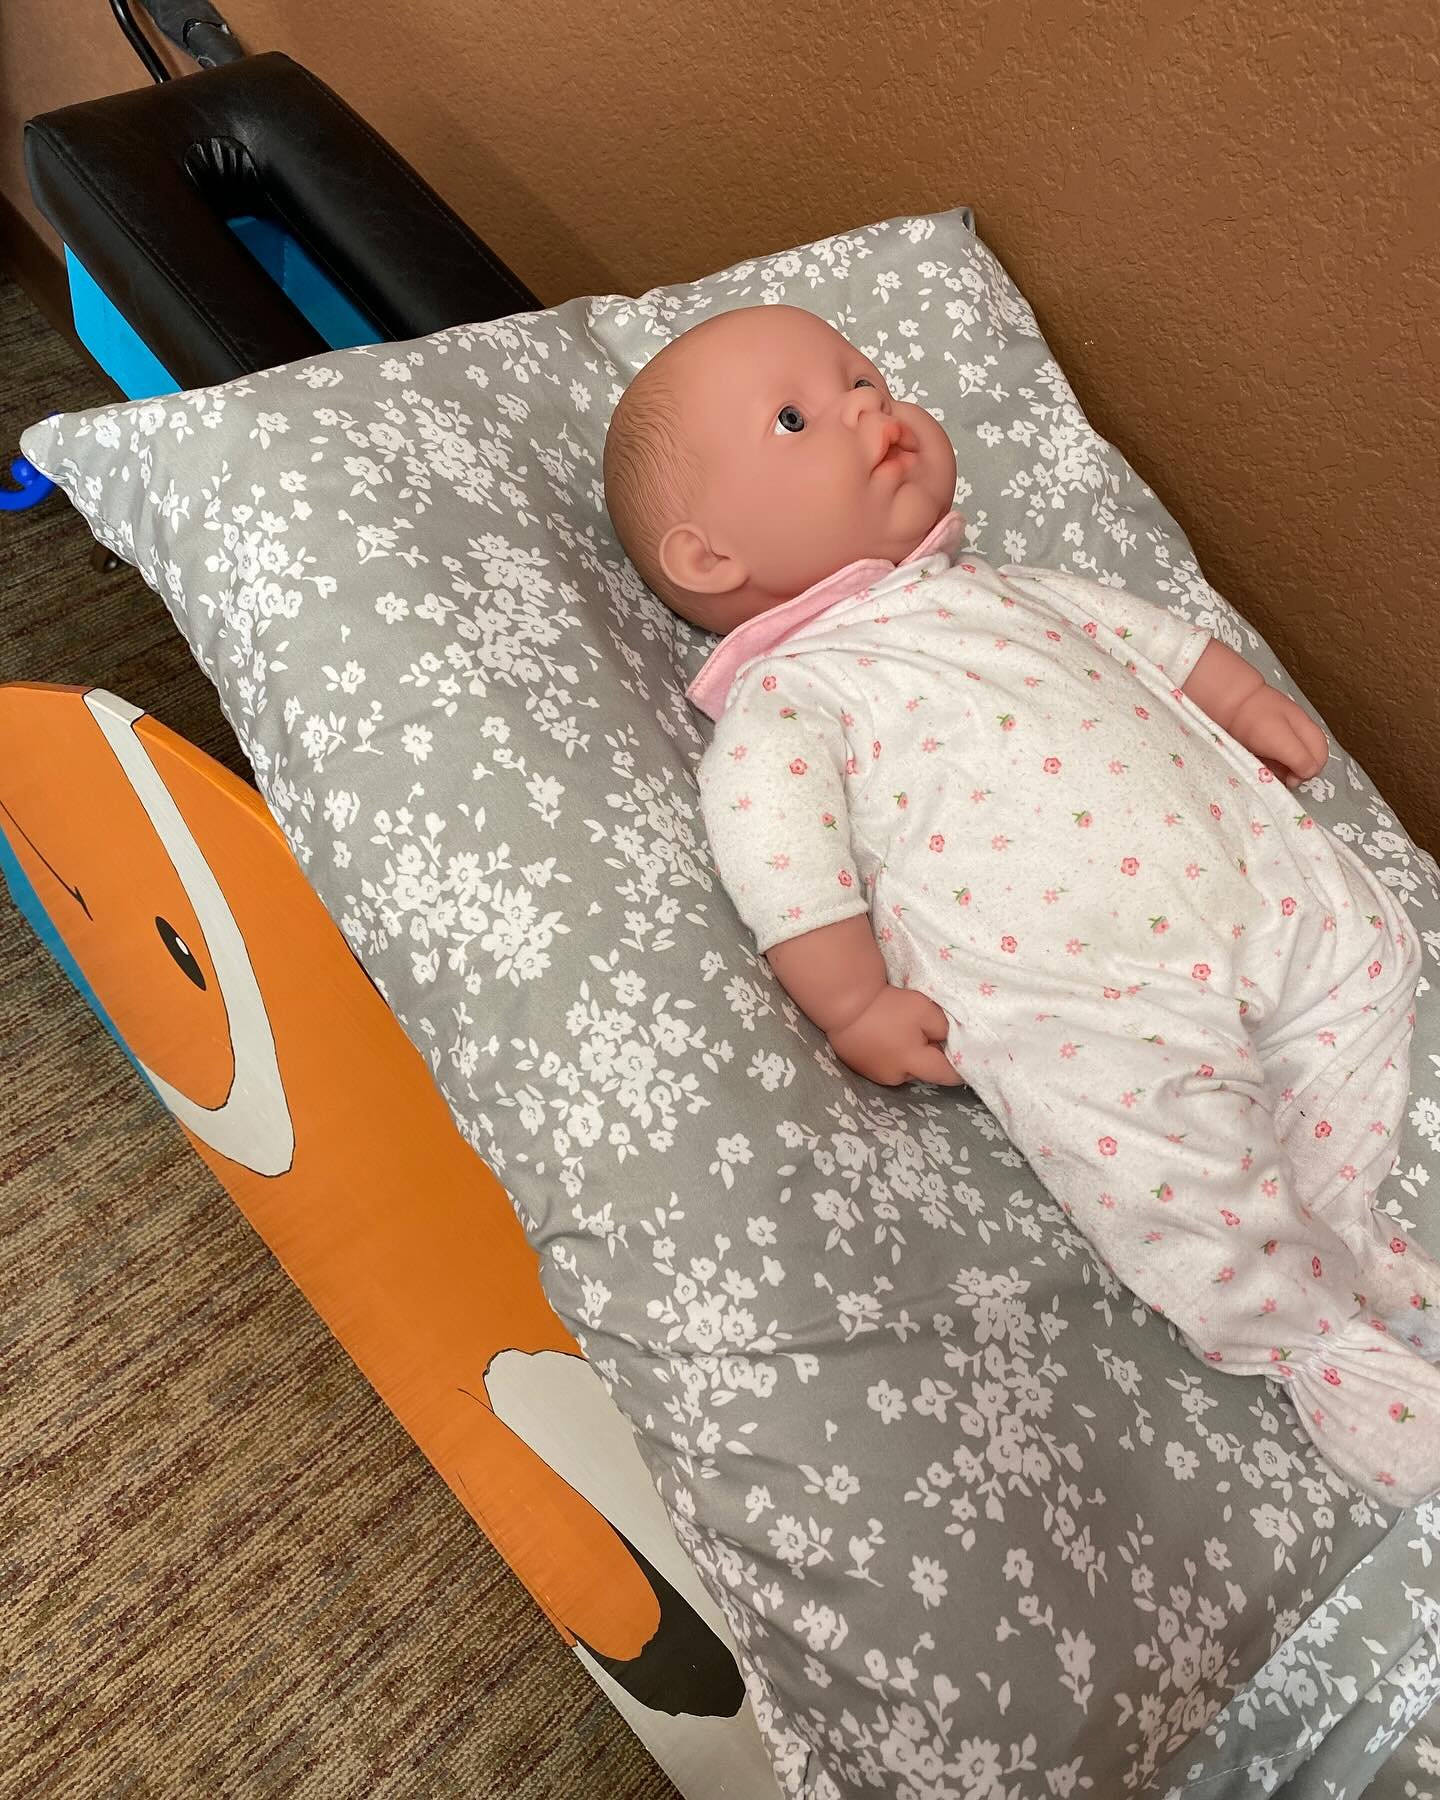 Heads up that our Worland clinic will be closed Monday, May 20. Dr. Sarah and this model baby are headed to a continuing education seminar in Dallas. Call or text us now if you need an appointment for May - our schedules are filling fast!

Dr. Sarah 